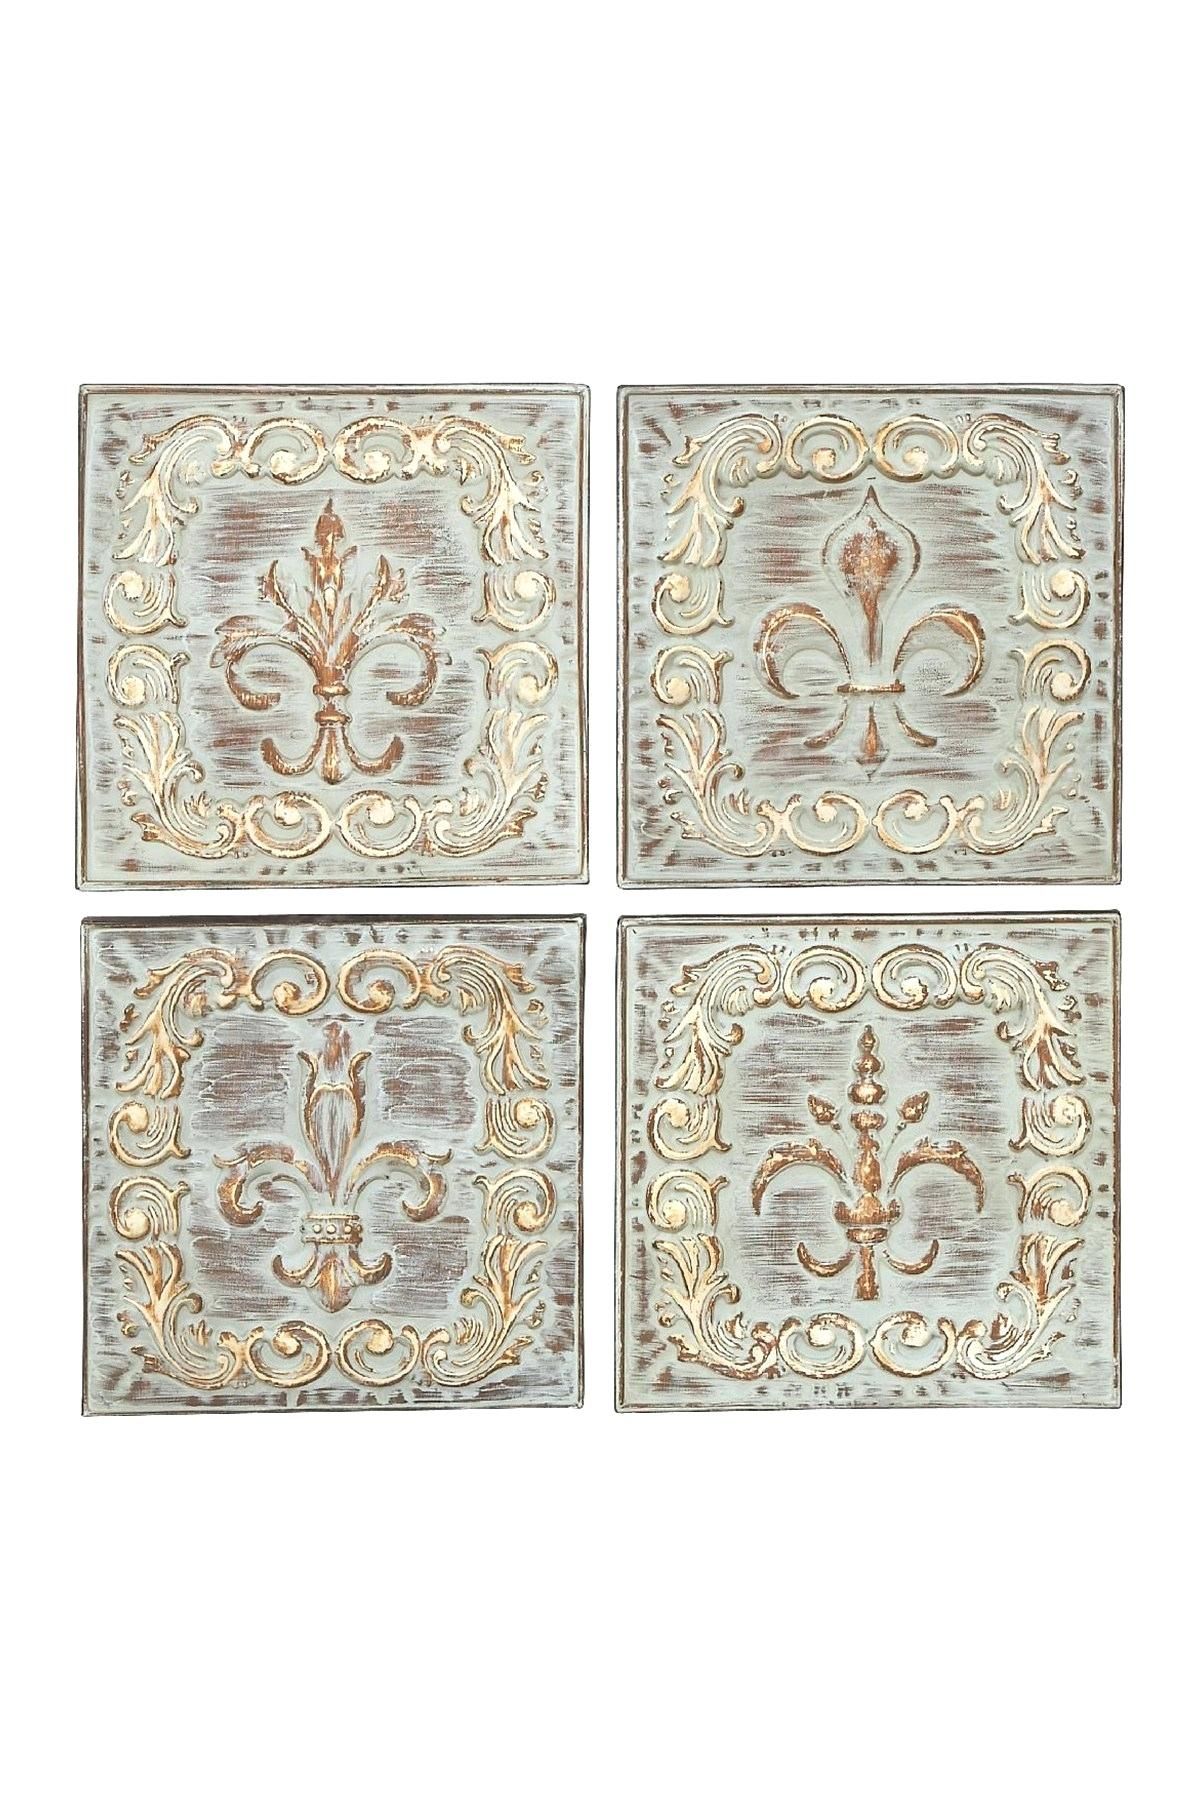 Trendy 4 Piece Wall Decor Sets Intended For Metal Wall Decor Set Full Size Of Modern Patio Wall Decor Sets Smart (View 17 of 20)